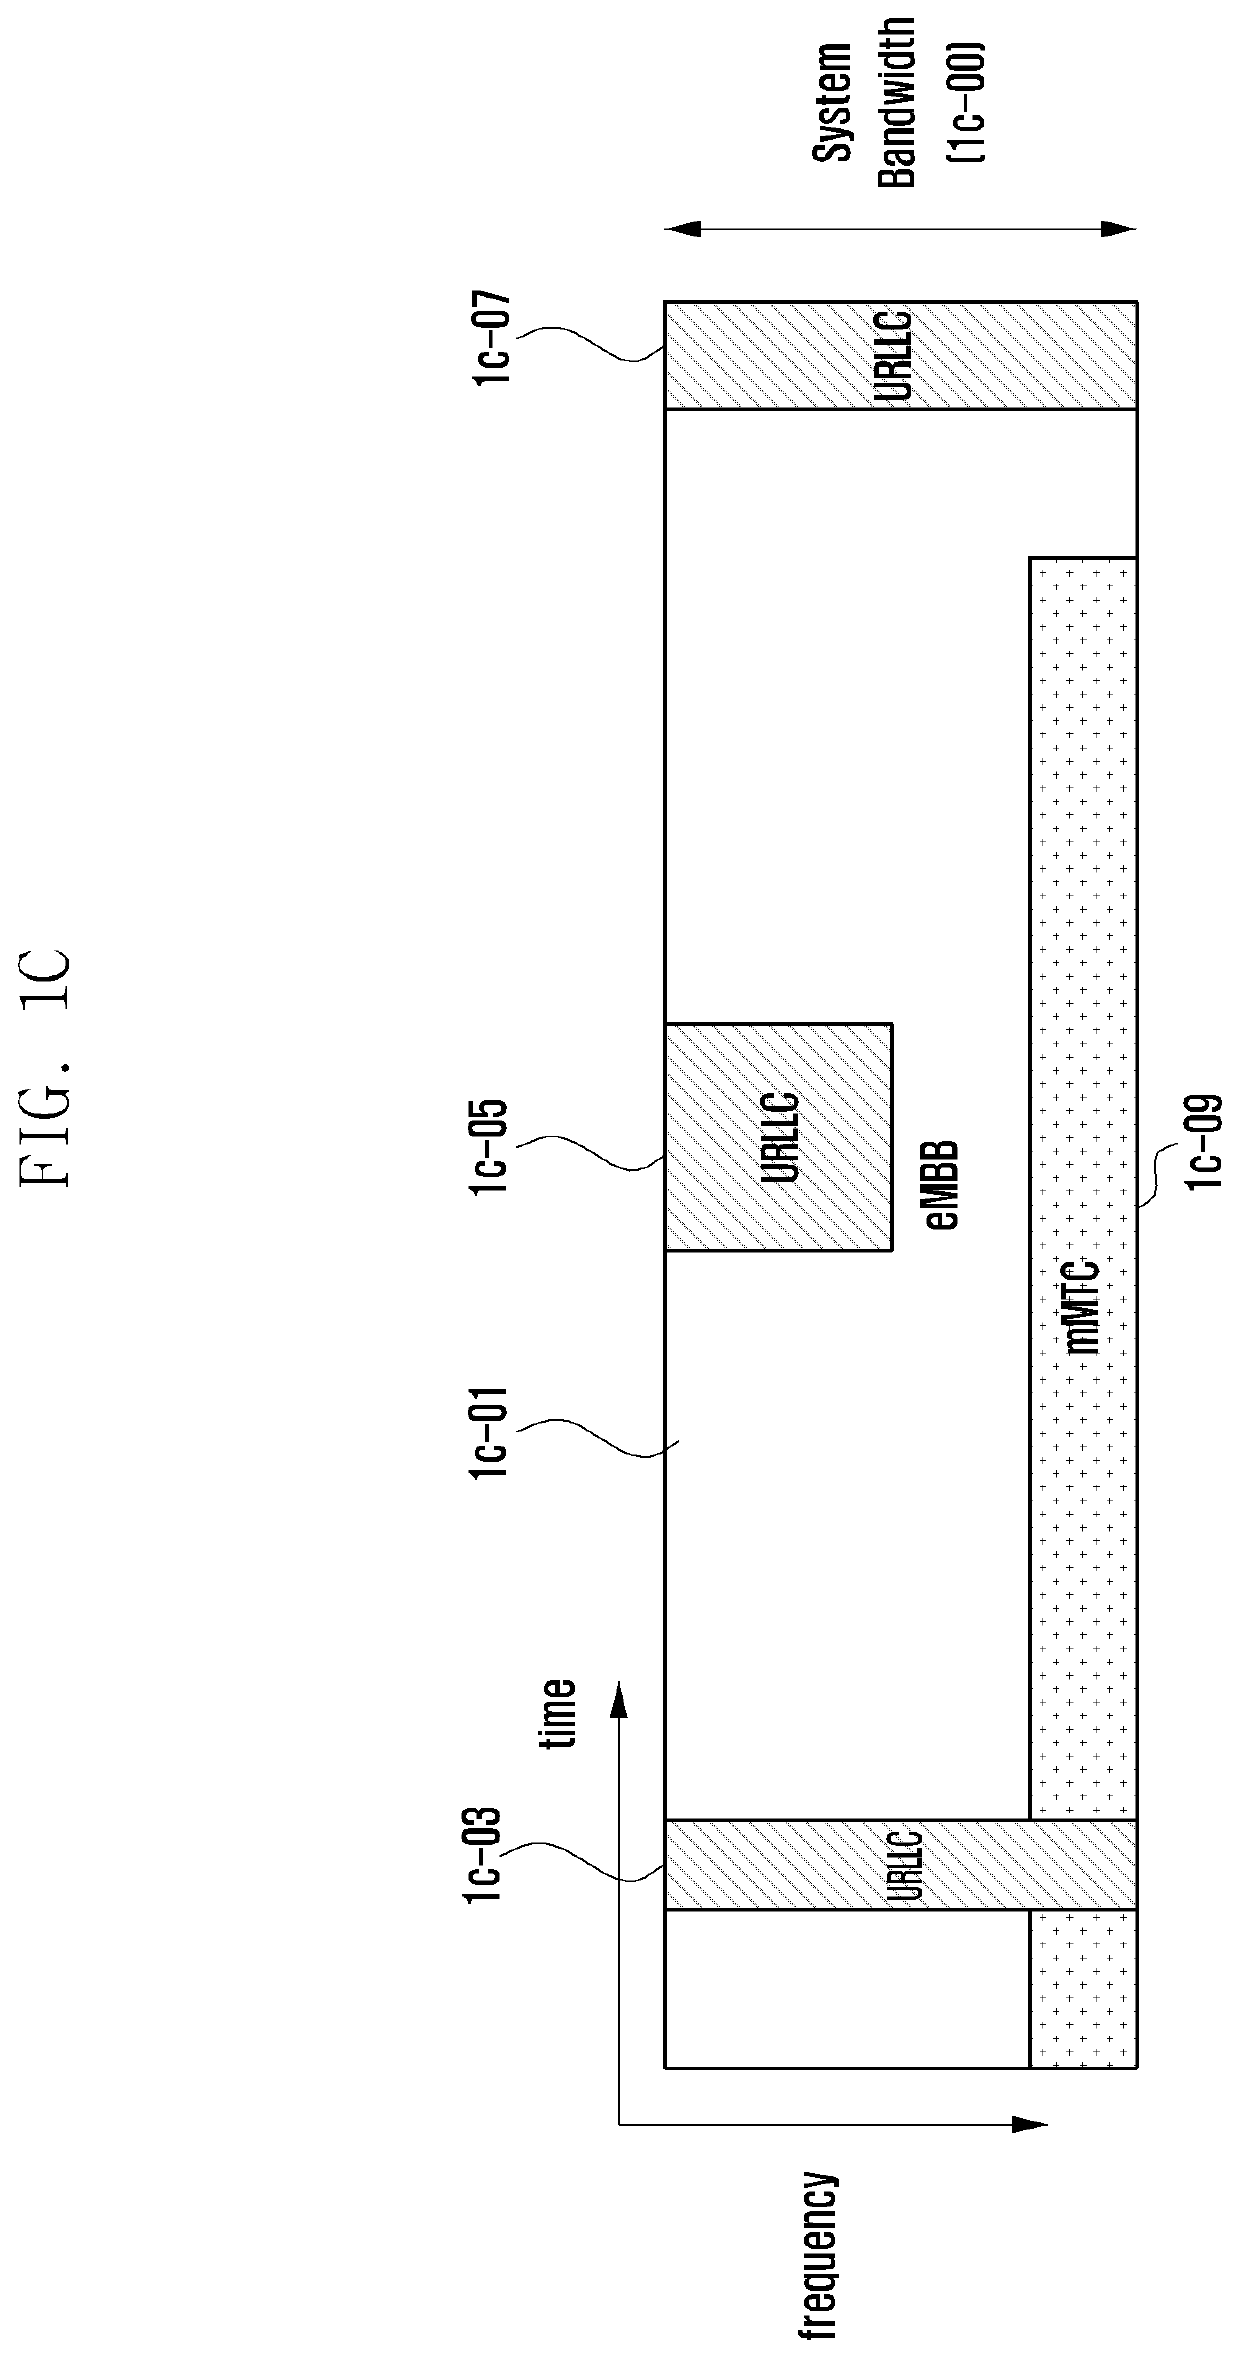 Method and apparatus for cell initial access and paging in wireless cellular communication system